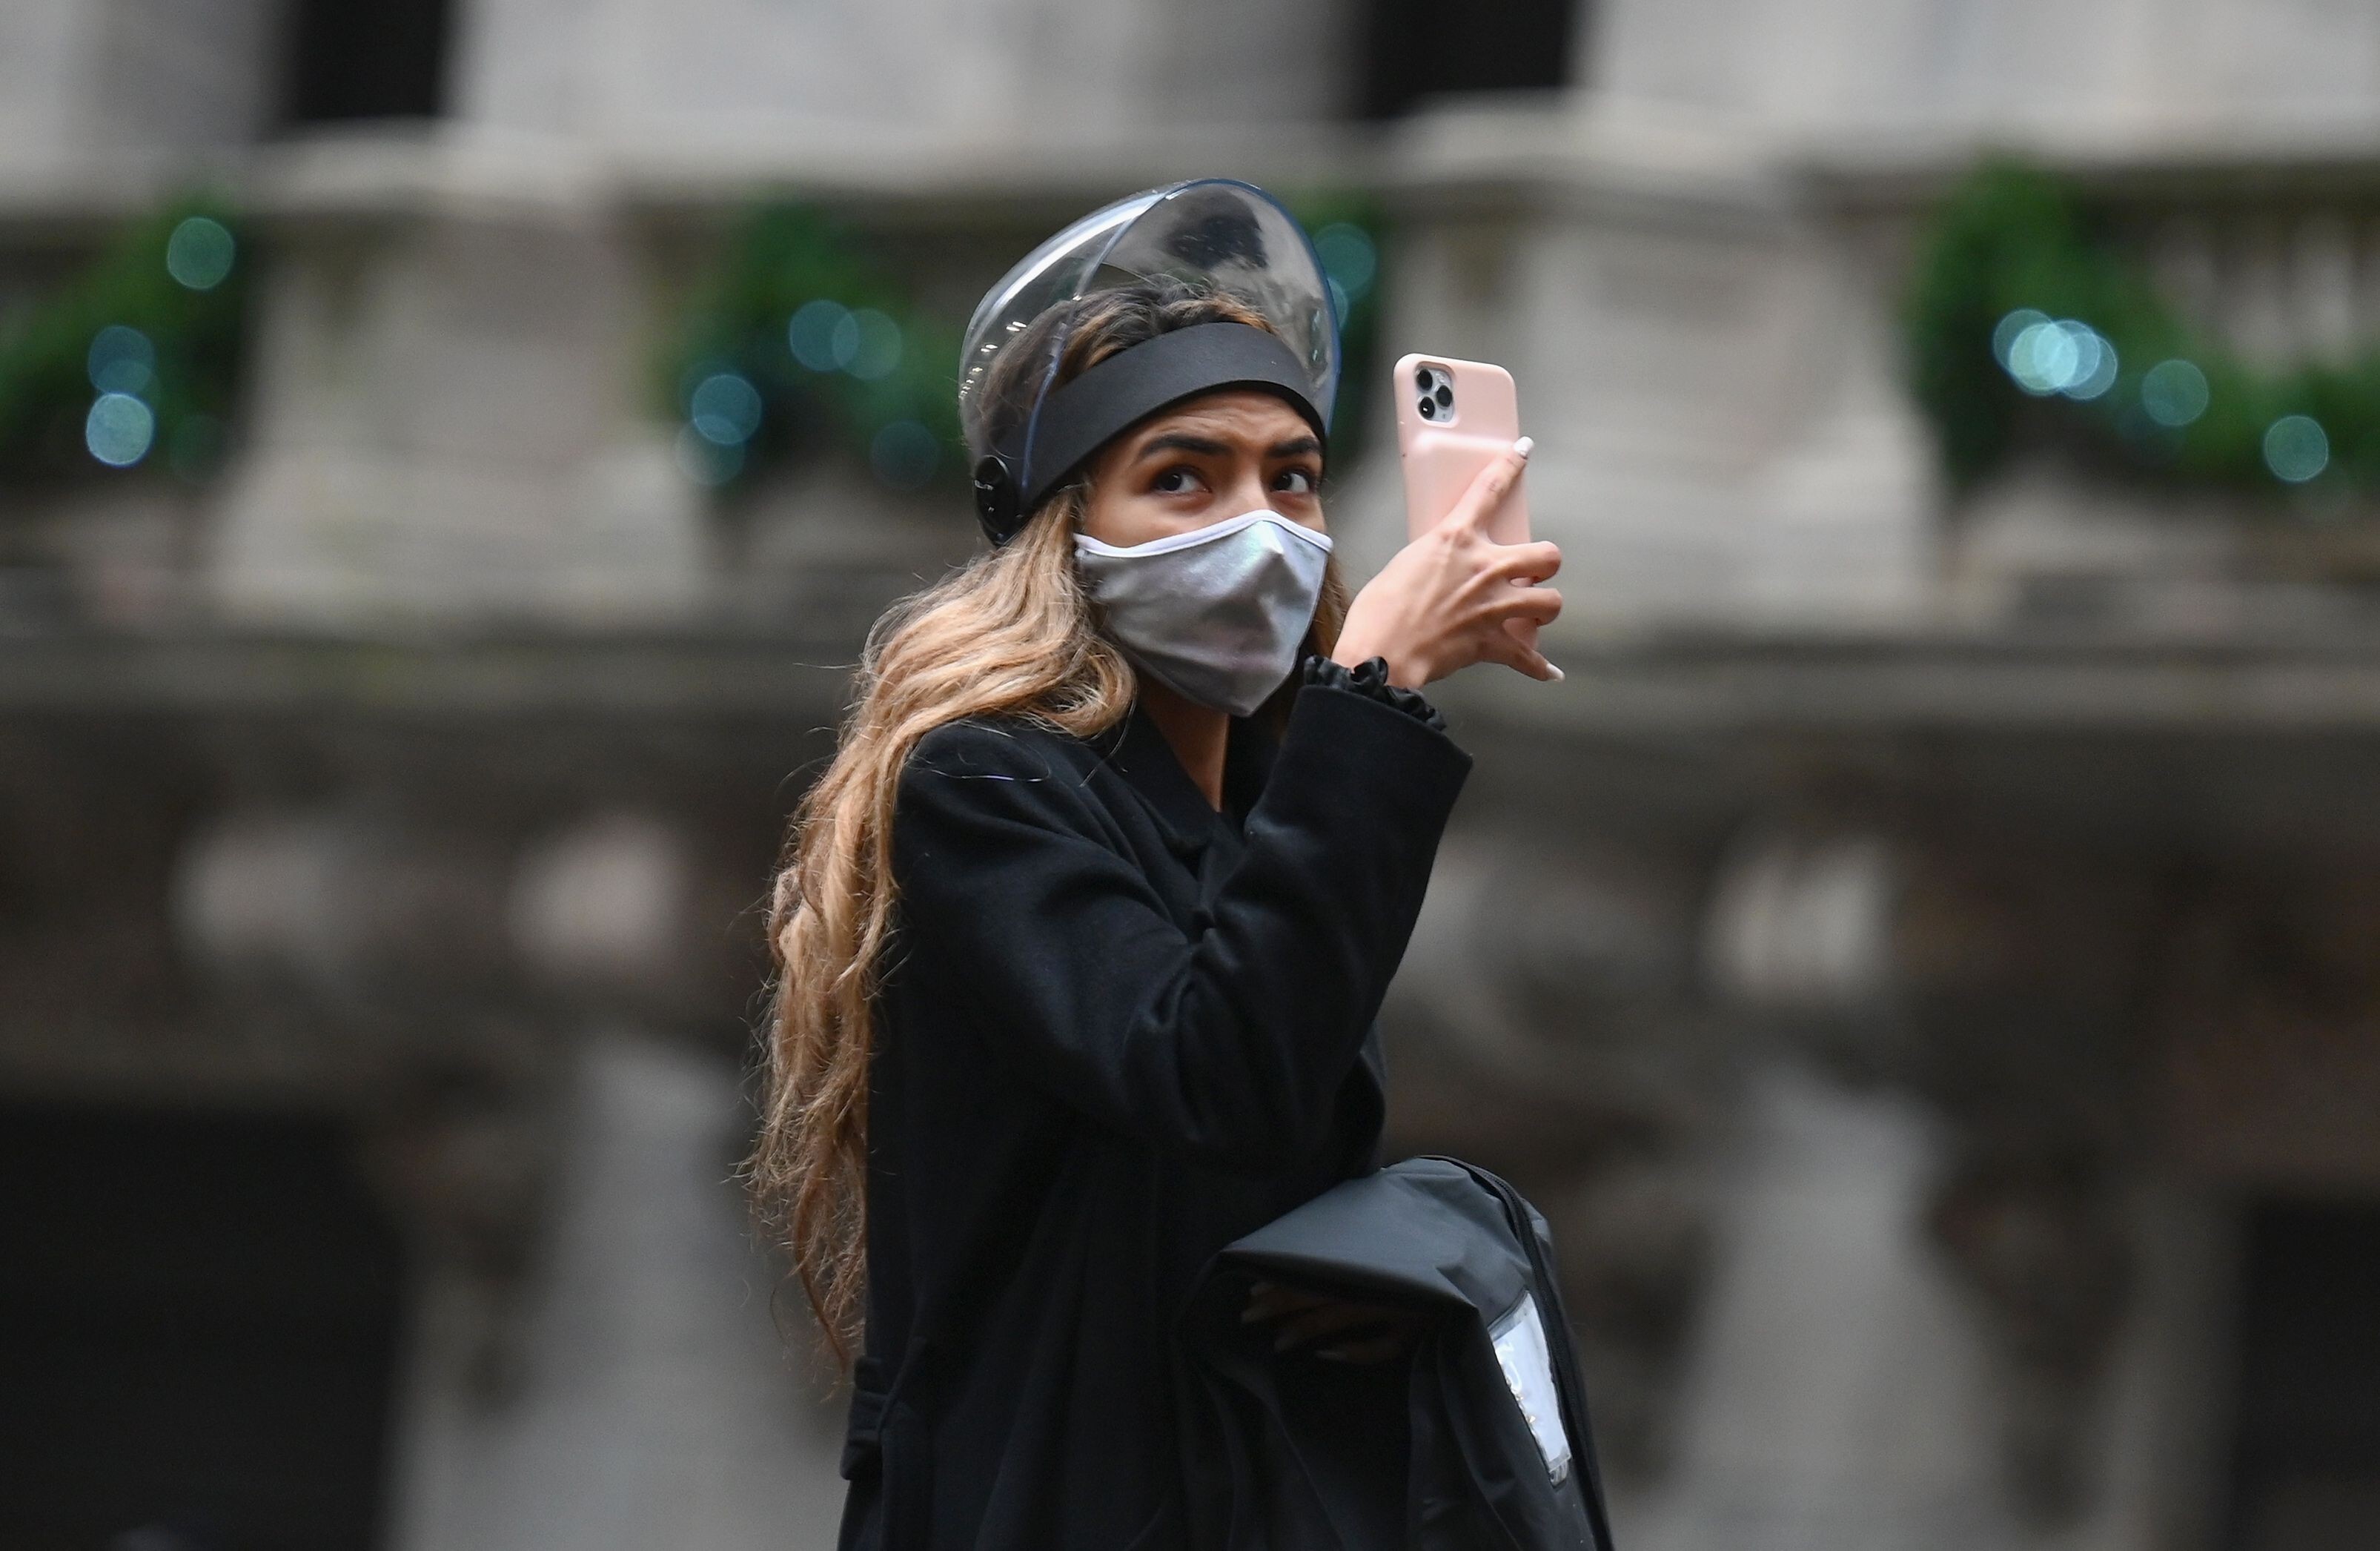 A woman takes a picture outside the New York Stock Exchange on November 30. Photo: AFP